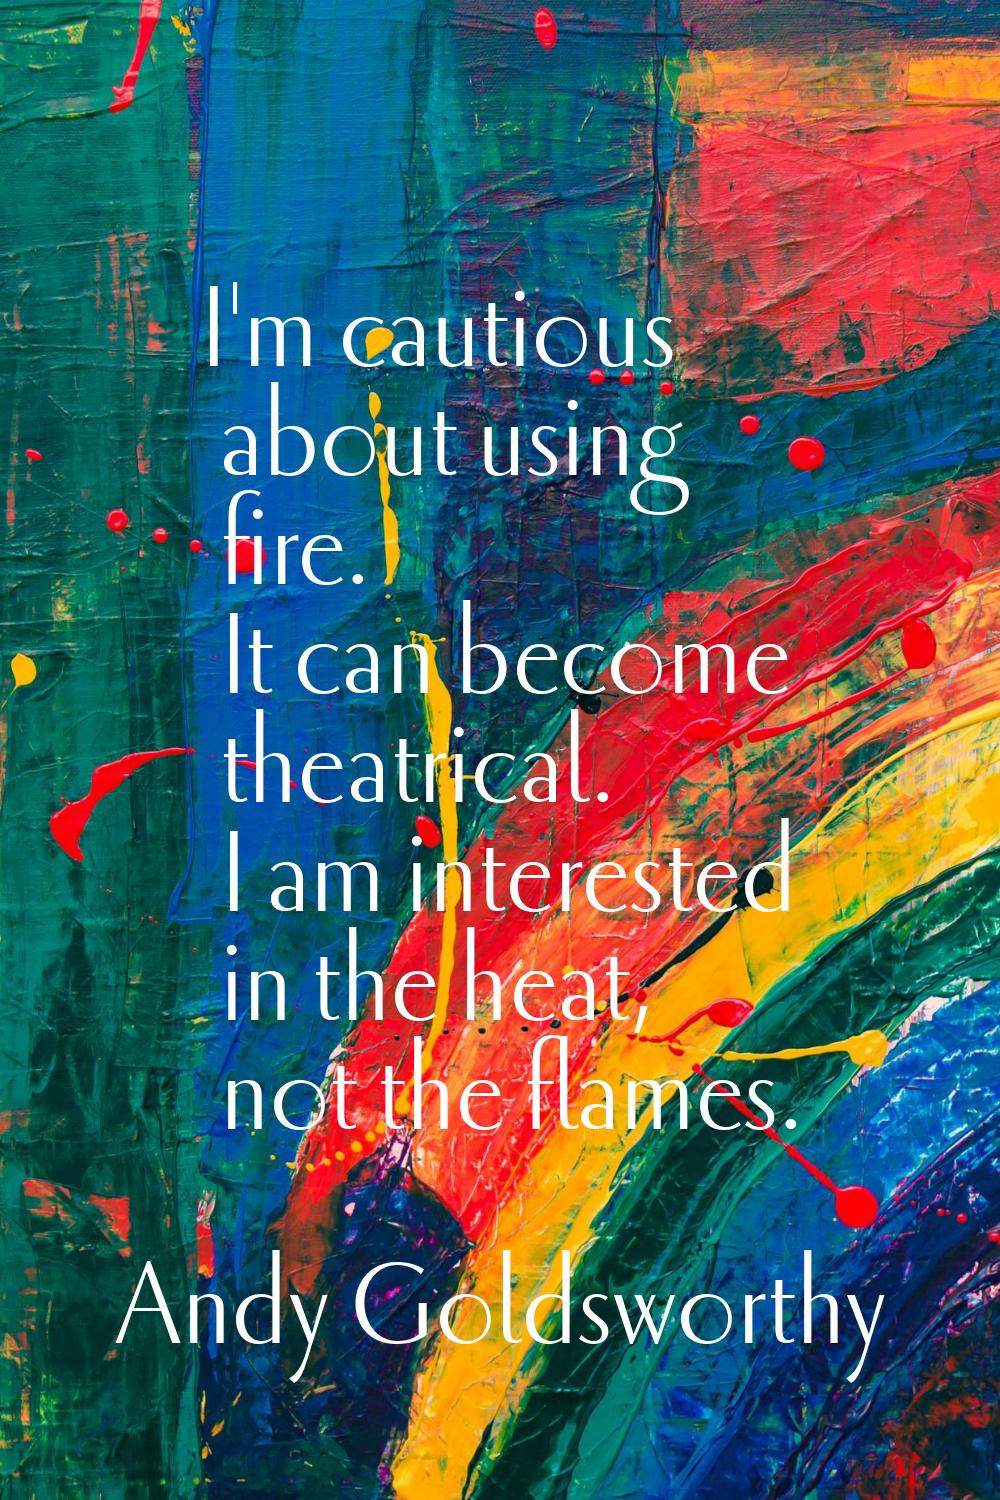 I'm cautious about using fire. It can become theatrical. I am interested in the heat, not the flame